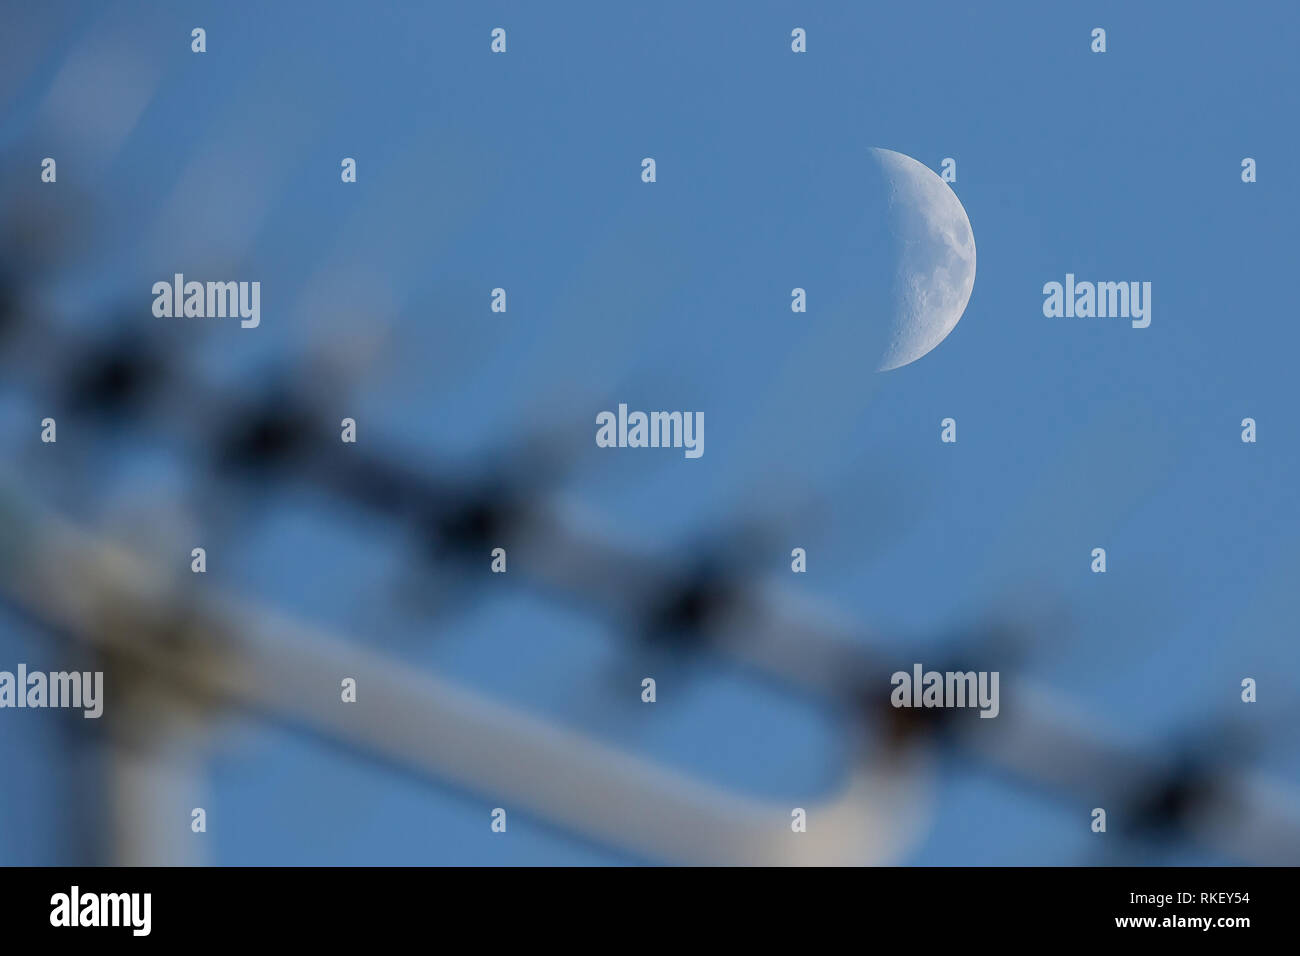 Kidderminster, UK, 11th February, 2019. UK weather: almost clear blue skies reveal a waxing crescent moon as the day draws to an end. It will be a chilly night with temperatures not rising above 2 degrees celsius. The moon can be seen rising above the television aerial on a UK house roof. Credit: Lee Hudson/Alamy Live News Stock Photo